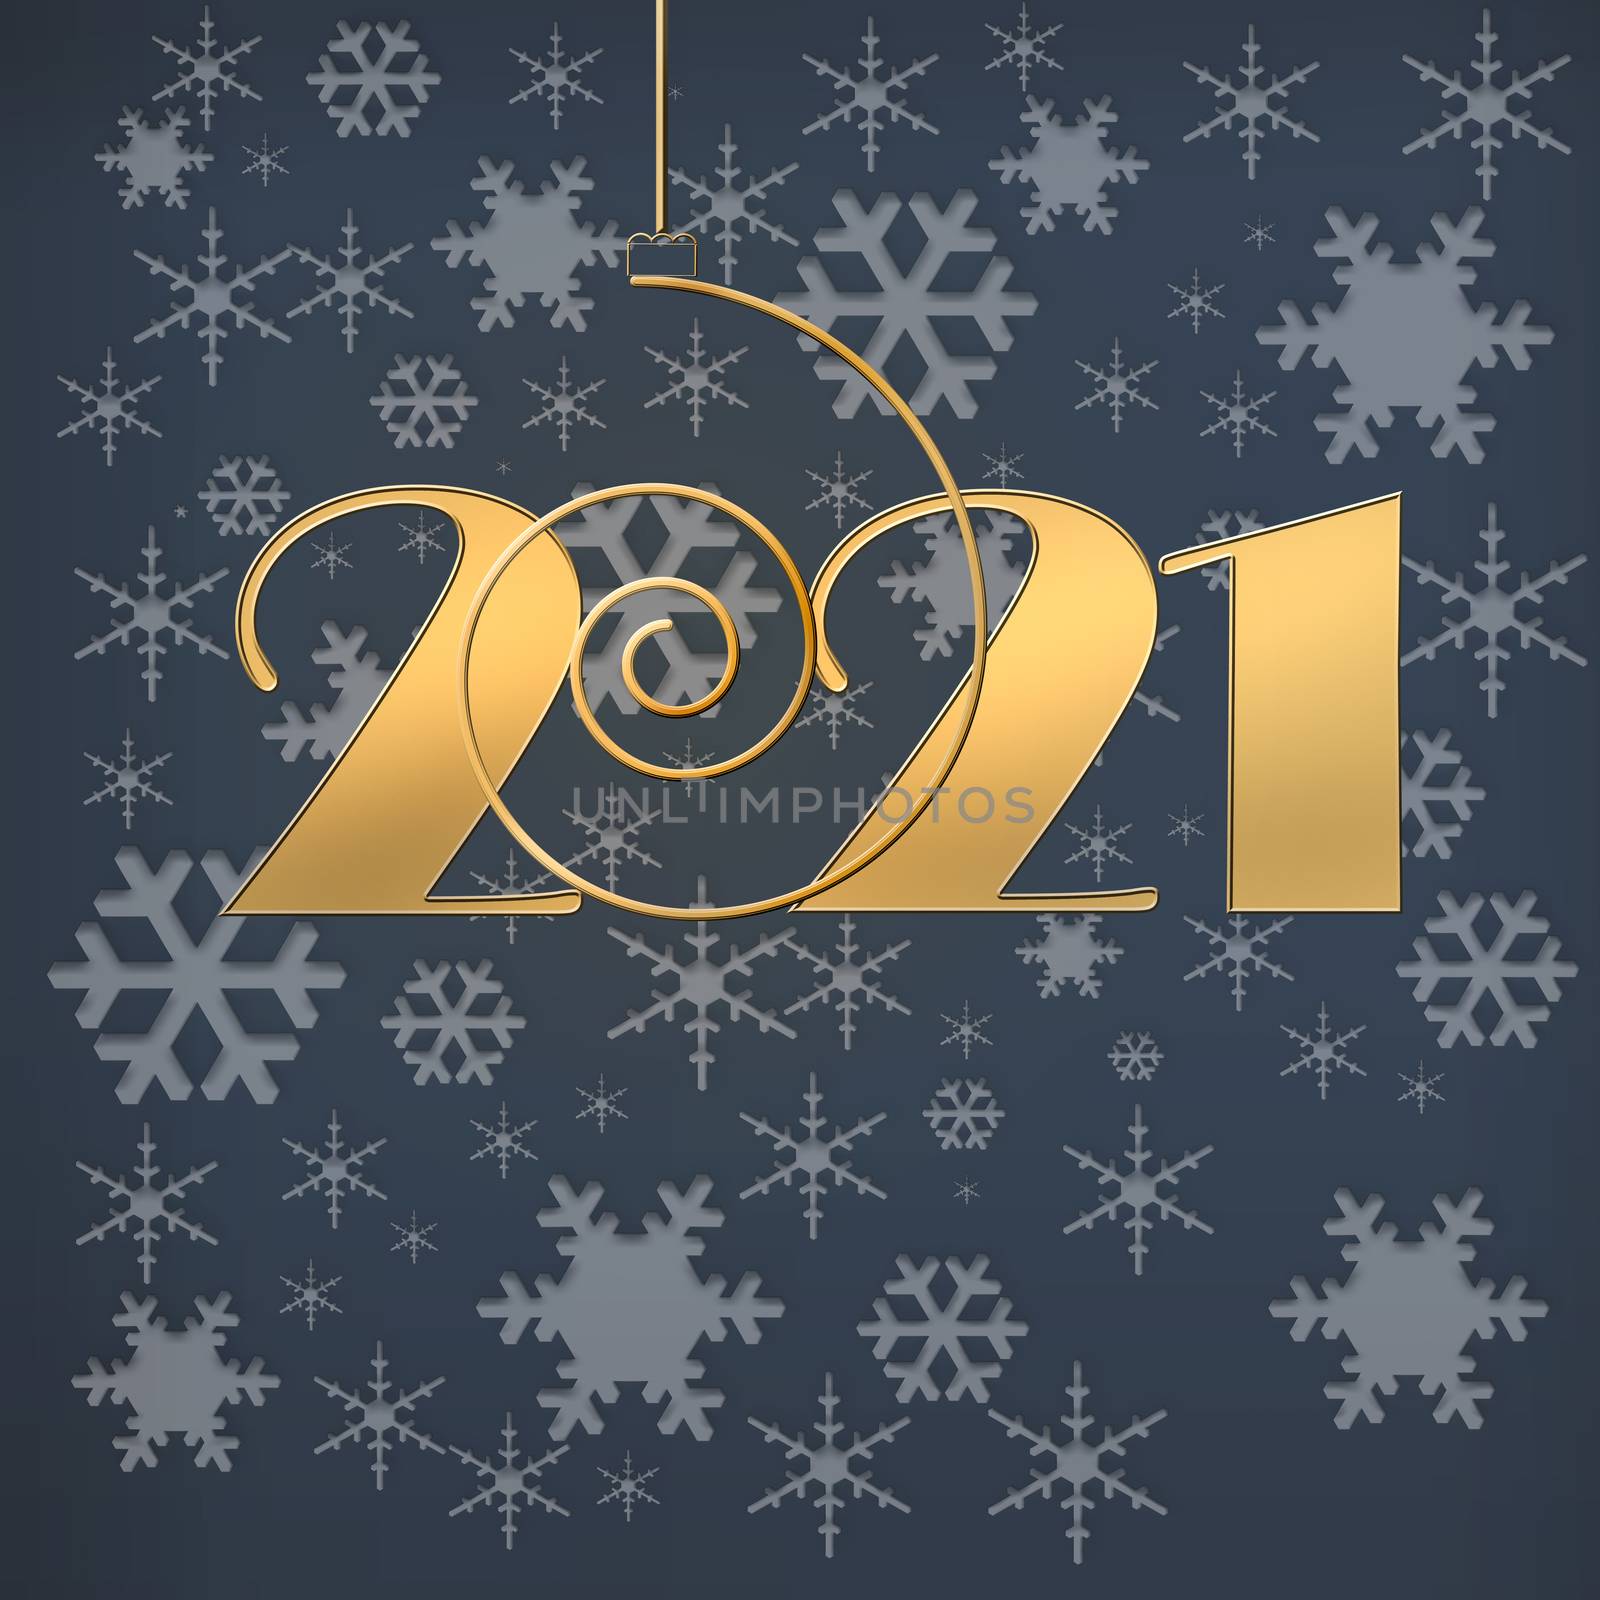 2021 happy new year background with golden spiral ball and snowflakes. Gold number 2021, business design template, mock up, banner, copy space. Greeting corporate card design. 3D illustration